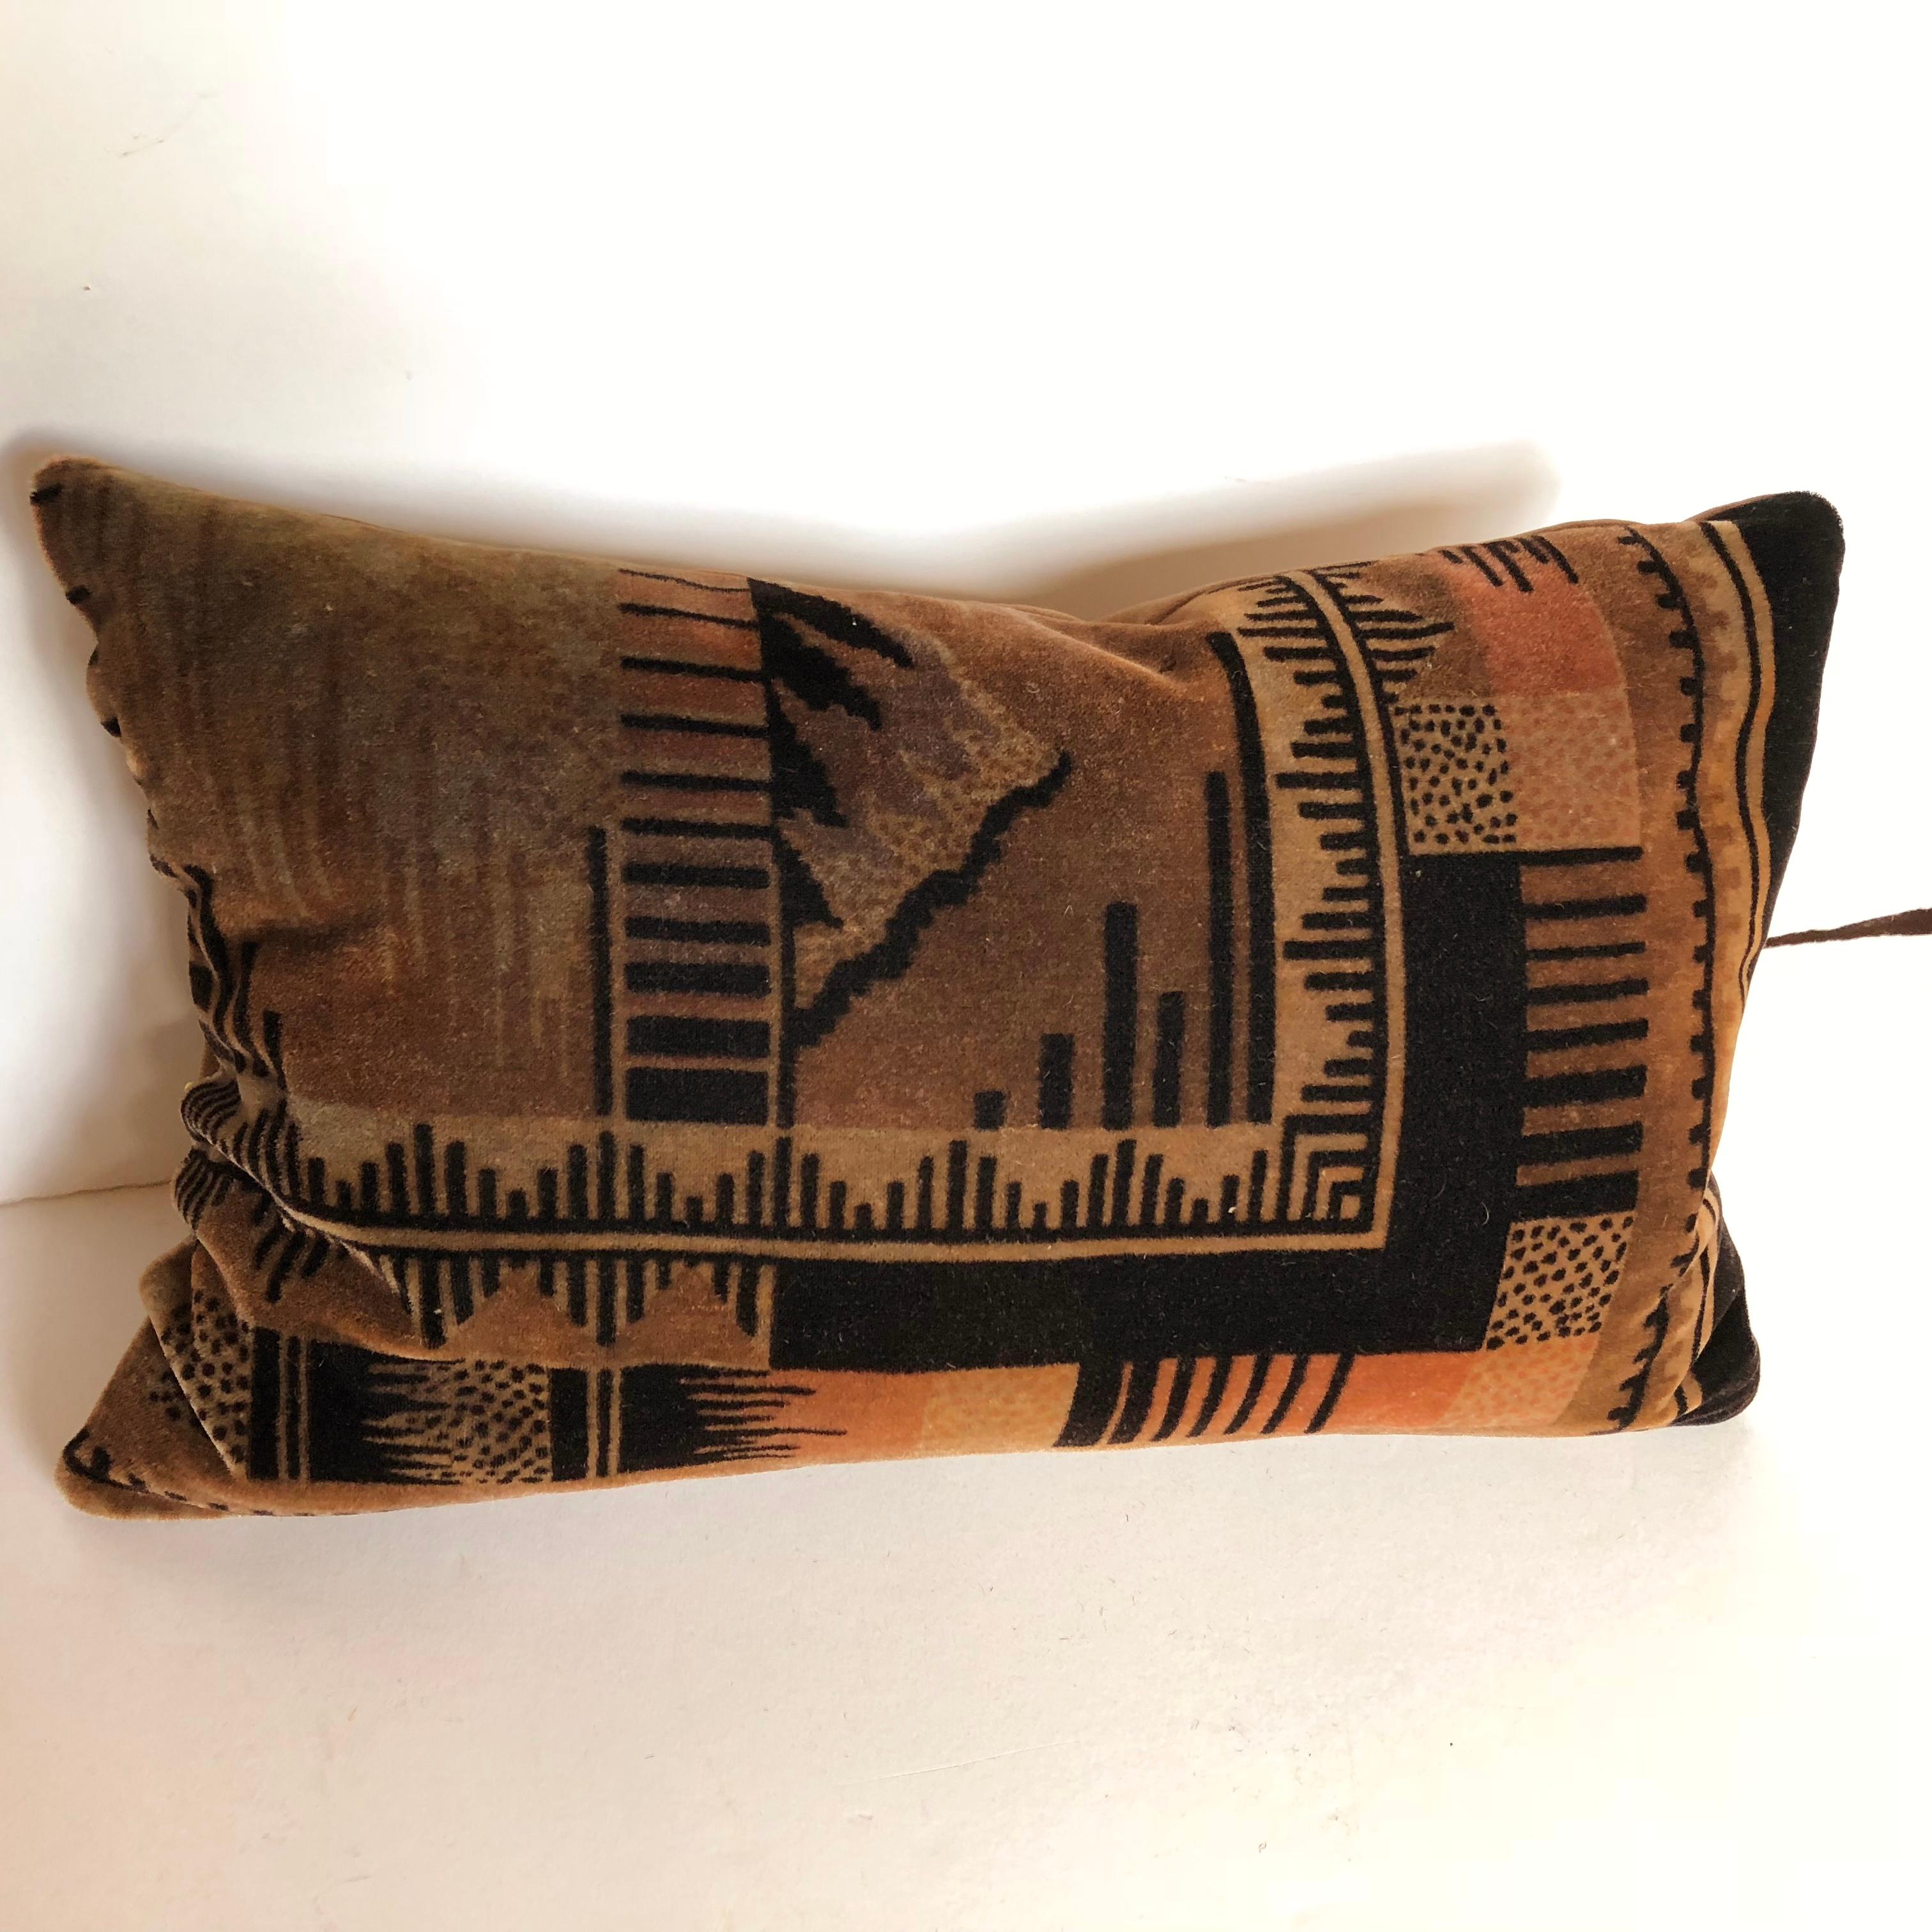 Custom pillow cut from an antique Amsterdam School Velvet textile, circa 1915 - 1927. Hand blocked art deco design with good color. Very rare. Pillow is backed in velvet, filled with an insert of 50/50 down and feathers and hand-sewn closed.